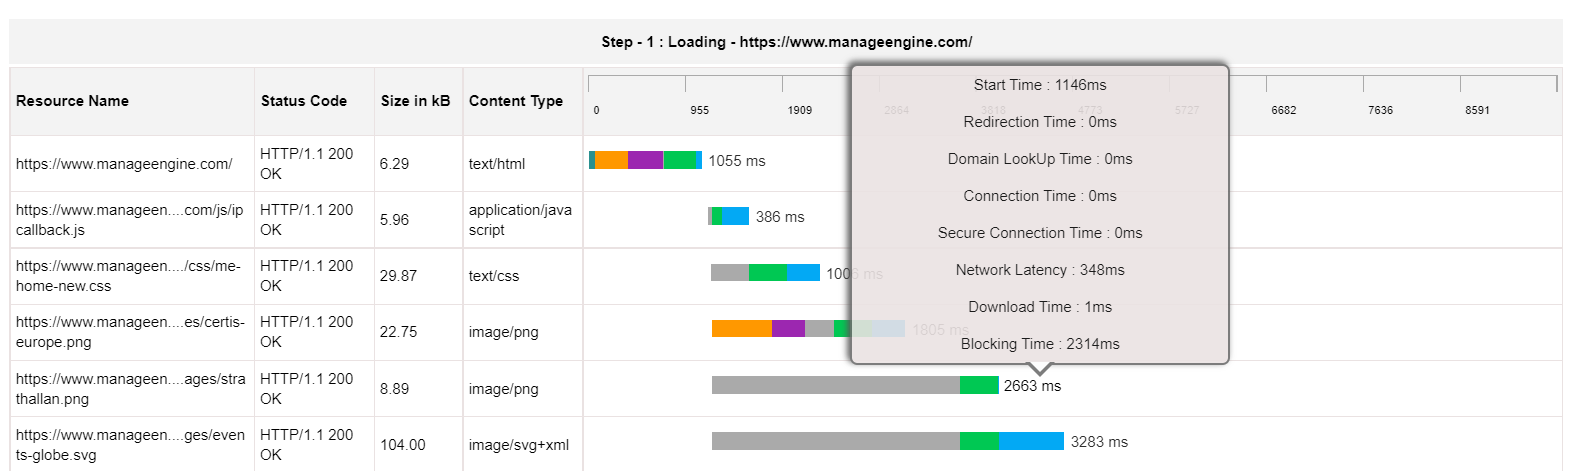 Web Application Monitoring - ManageEngine Applications Manager